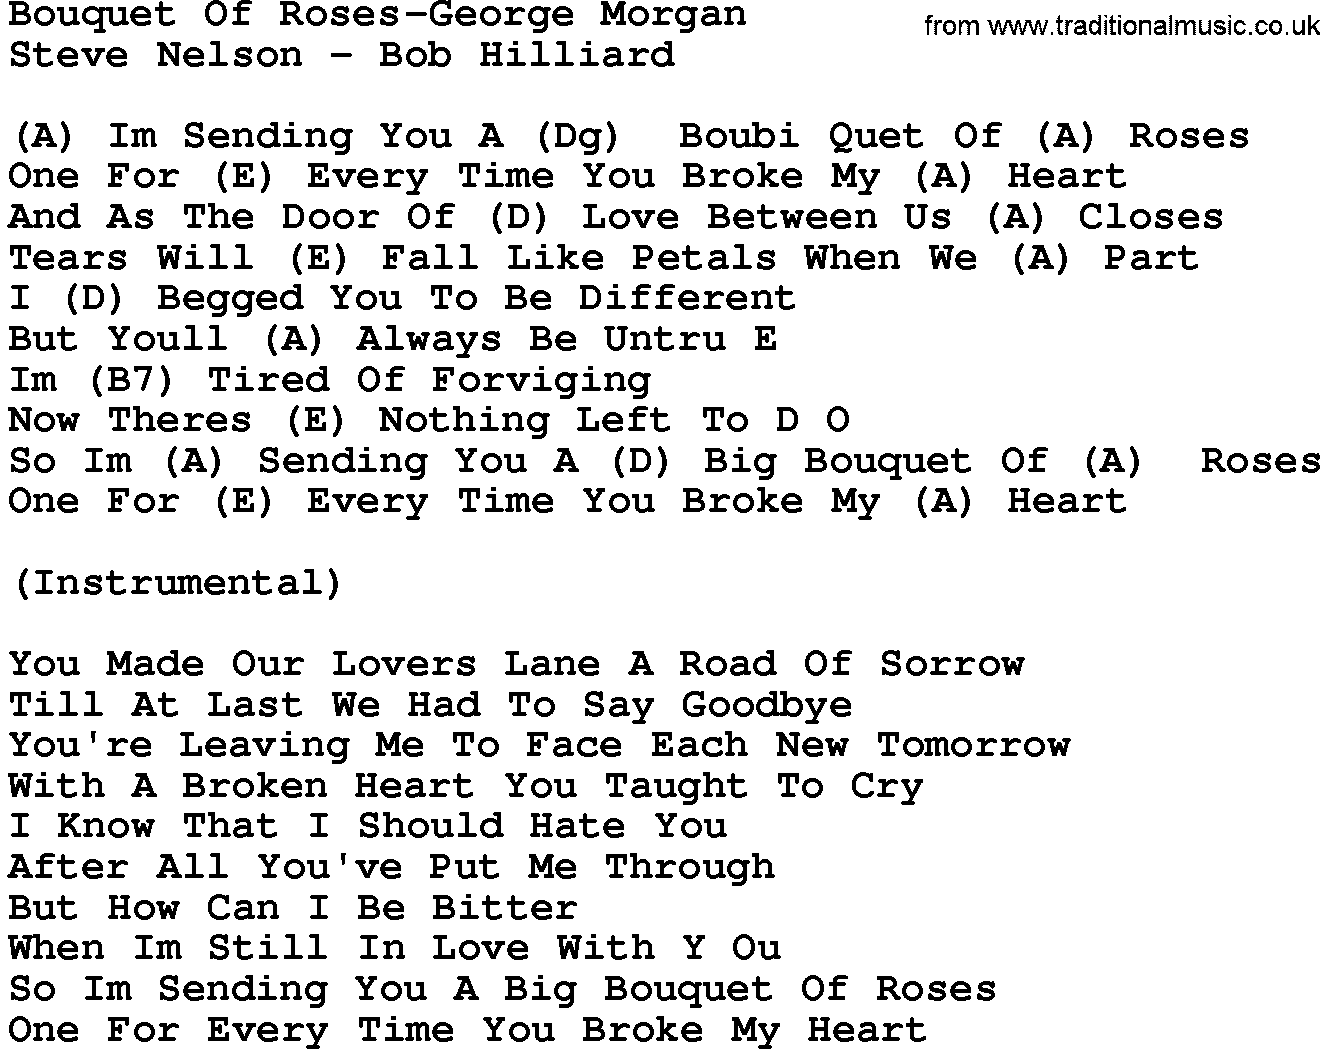 Country music song: Bouquet Of Roses-George Morgan lyrics and chords